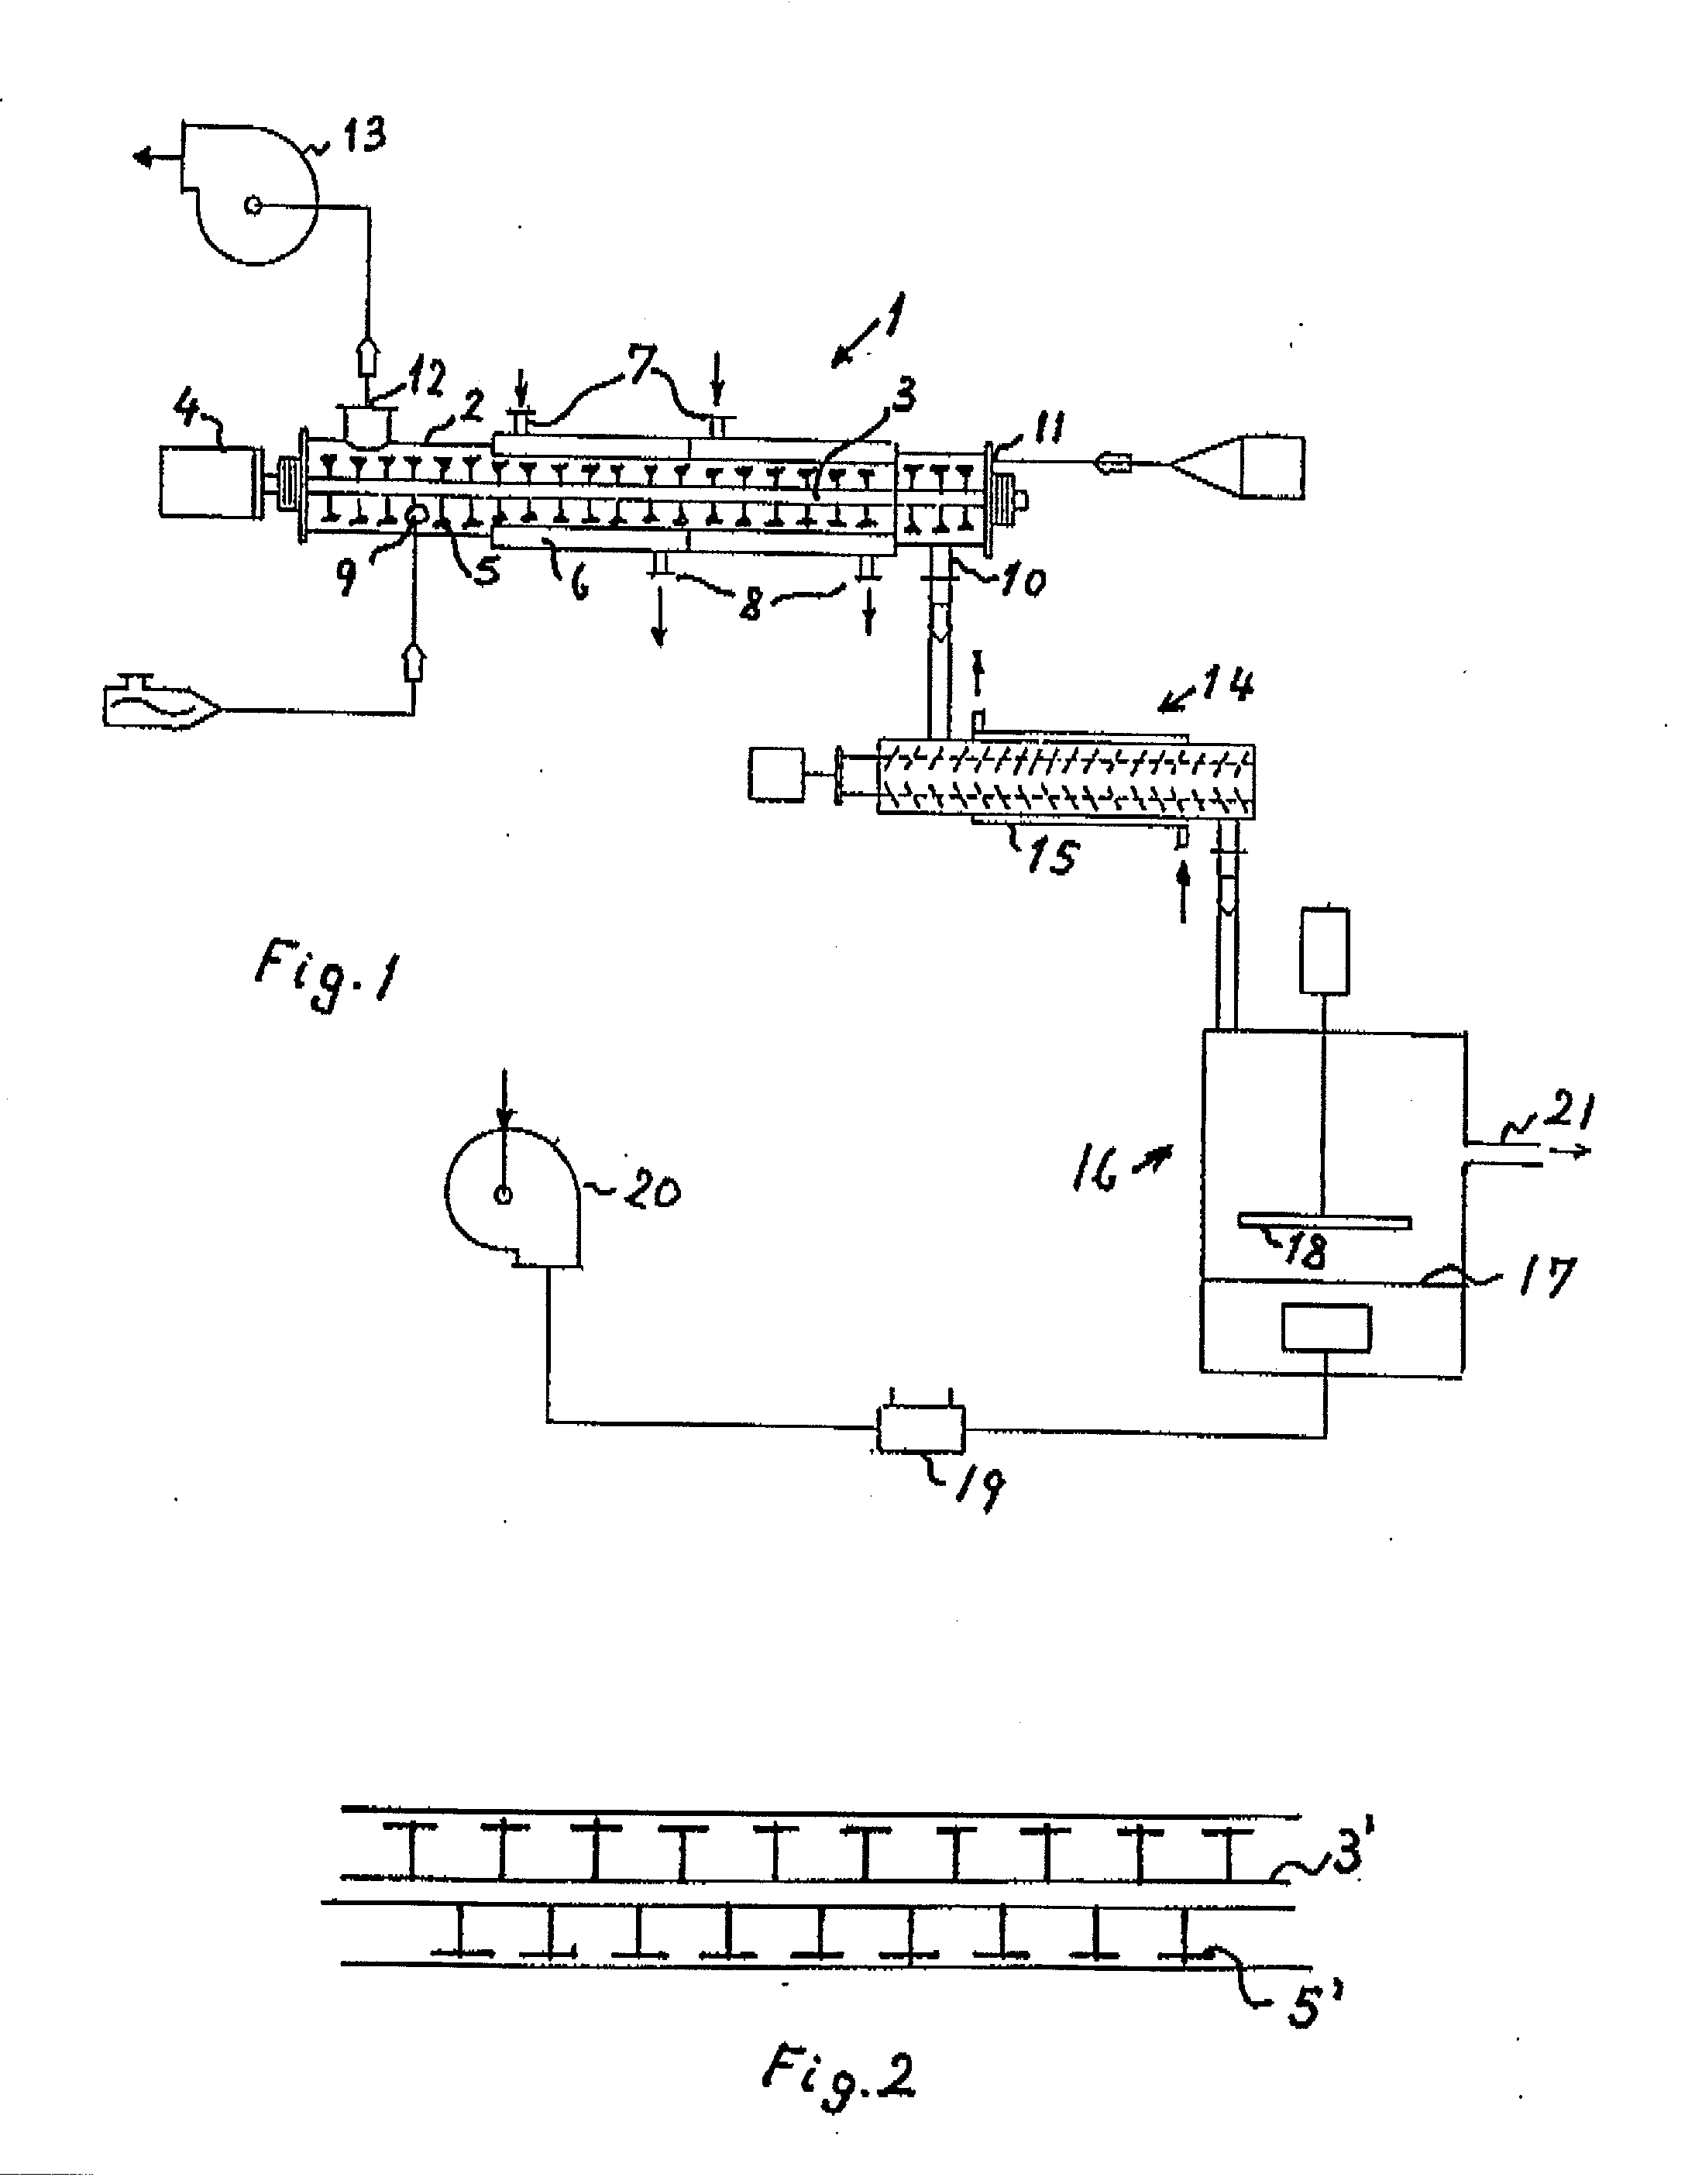 Process and plant for evaporative concentration and crystallization of a viscous lactose-containing aqueous liquid